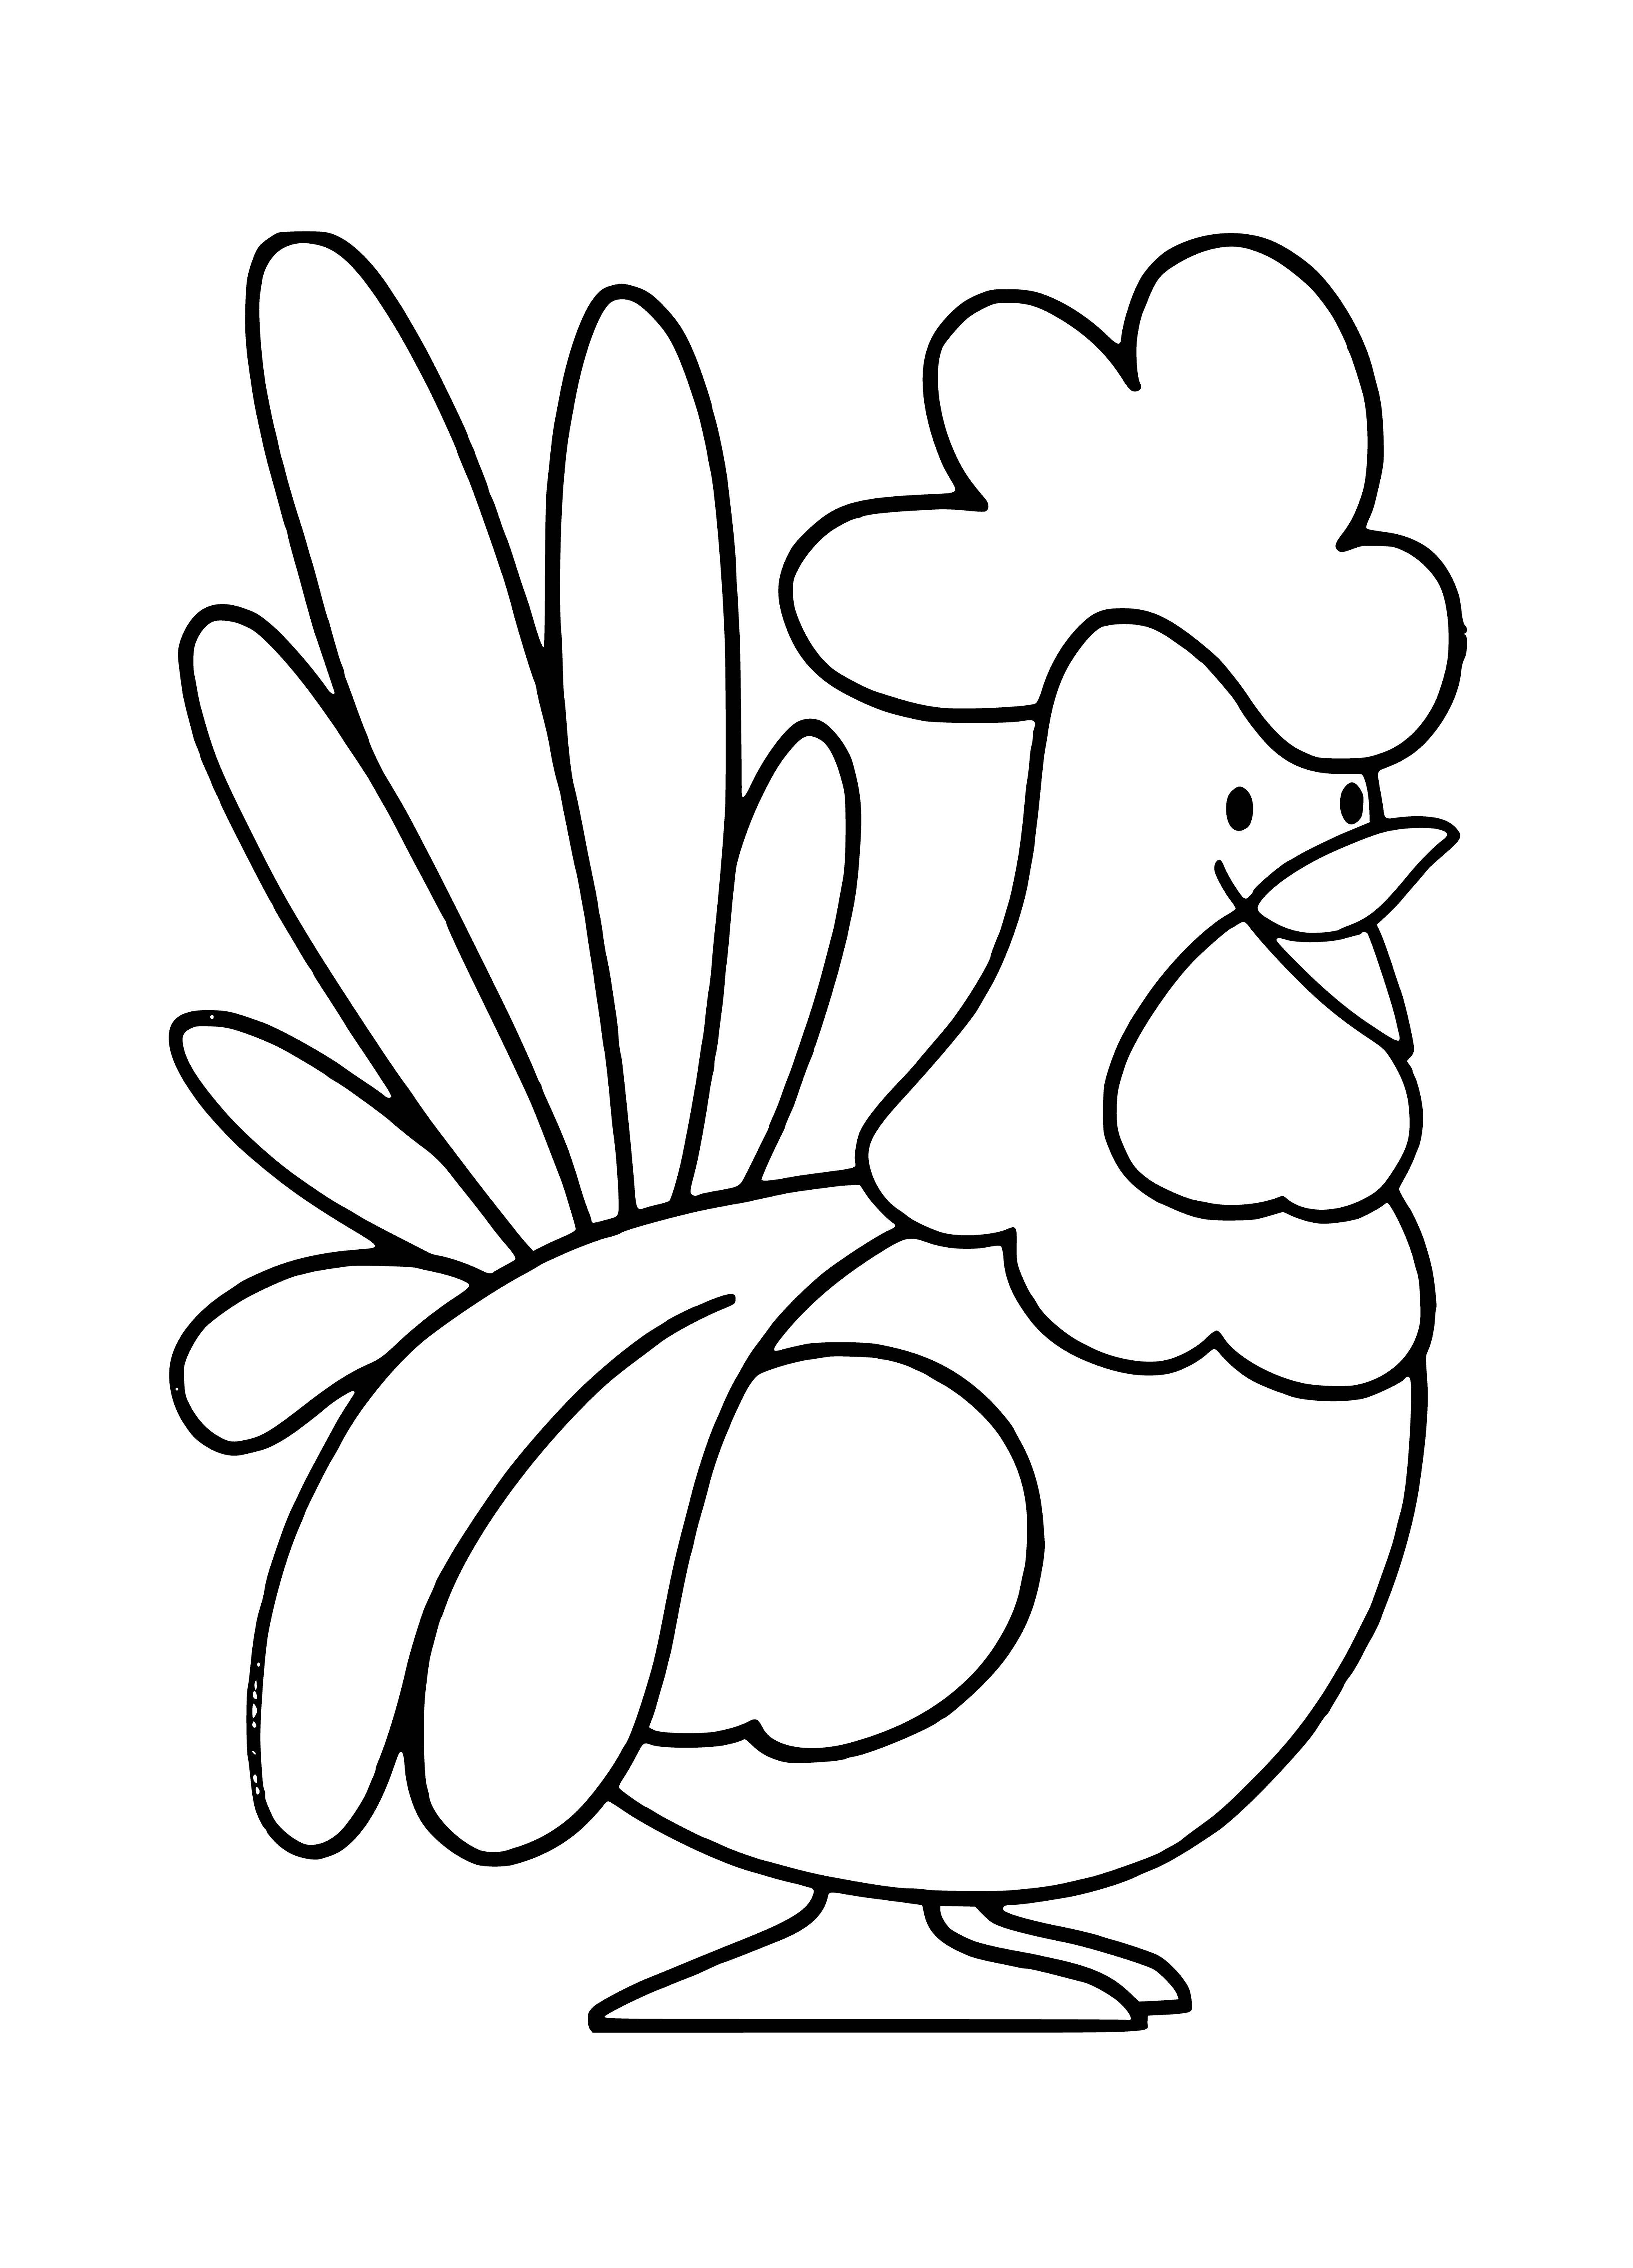 coloring page: Toy rooster made of plastic, brown & white, with big eyes, red comb, & pointy tail.